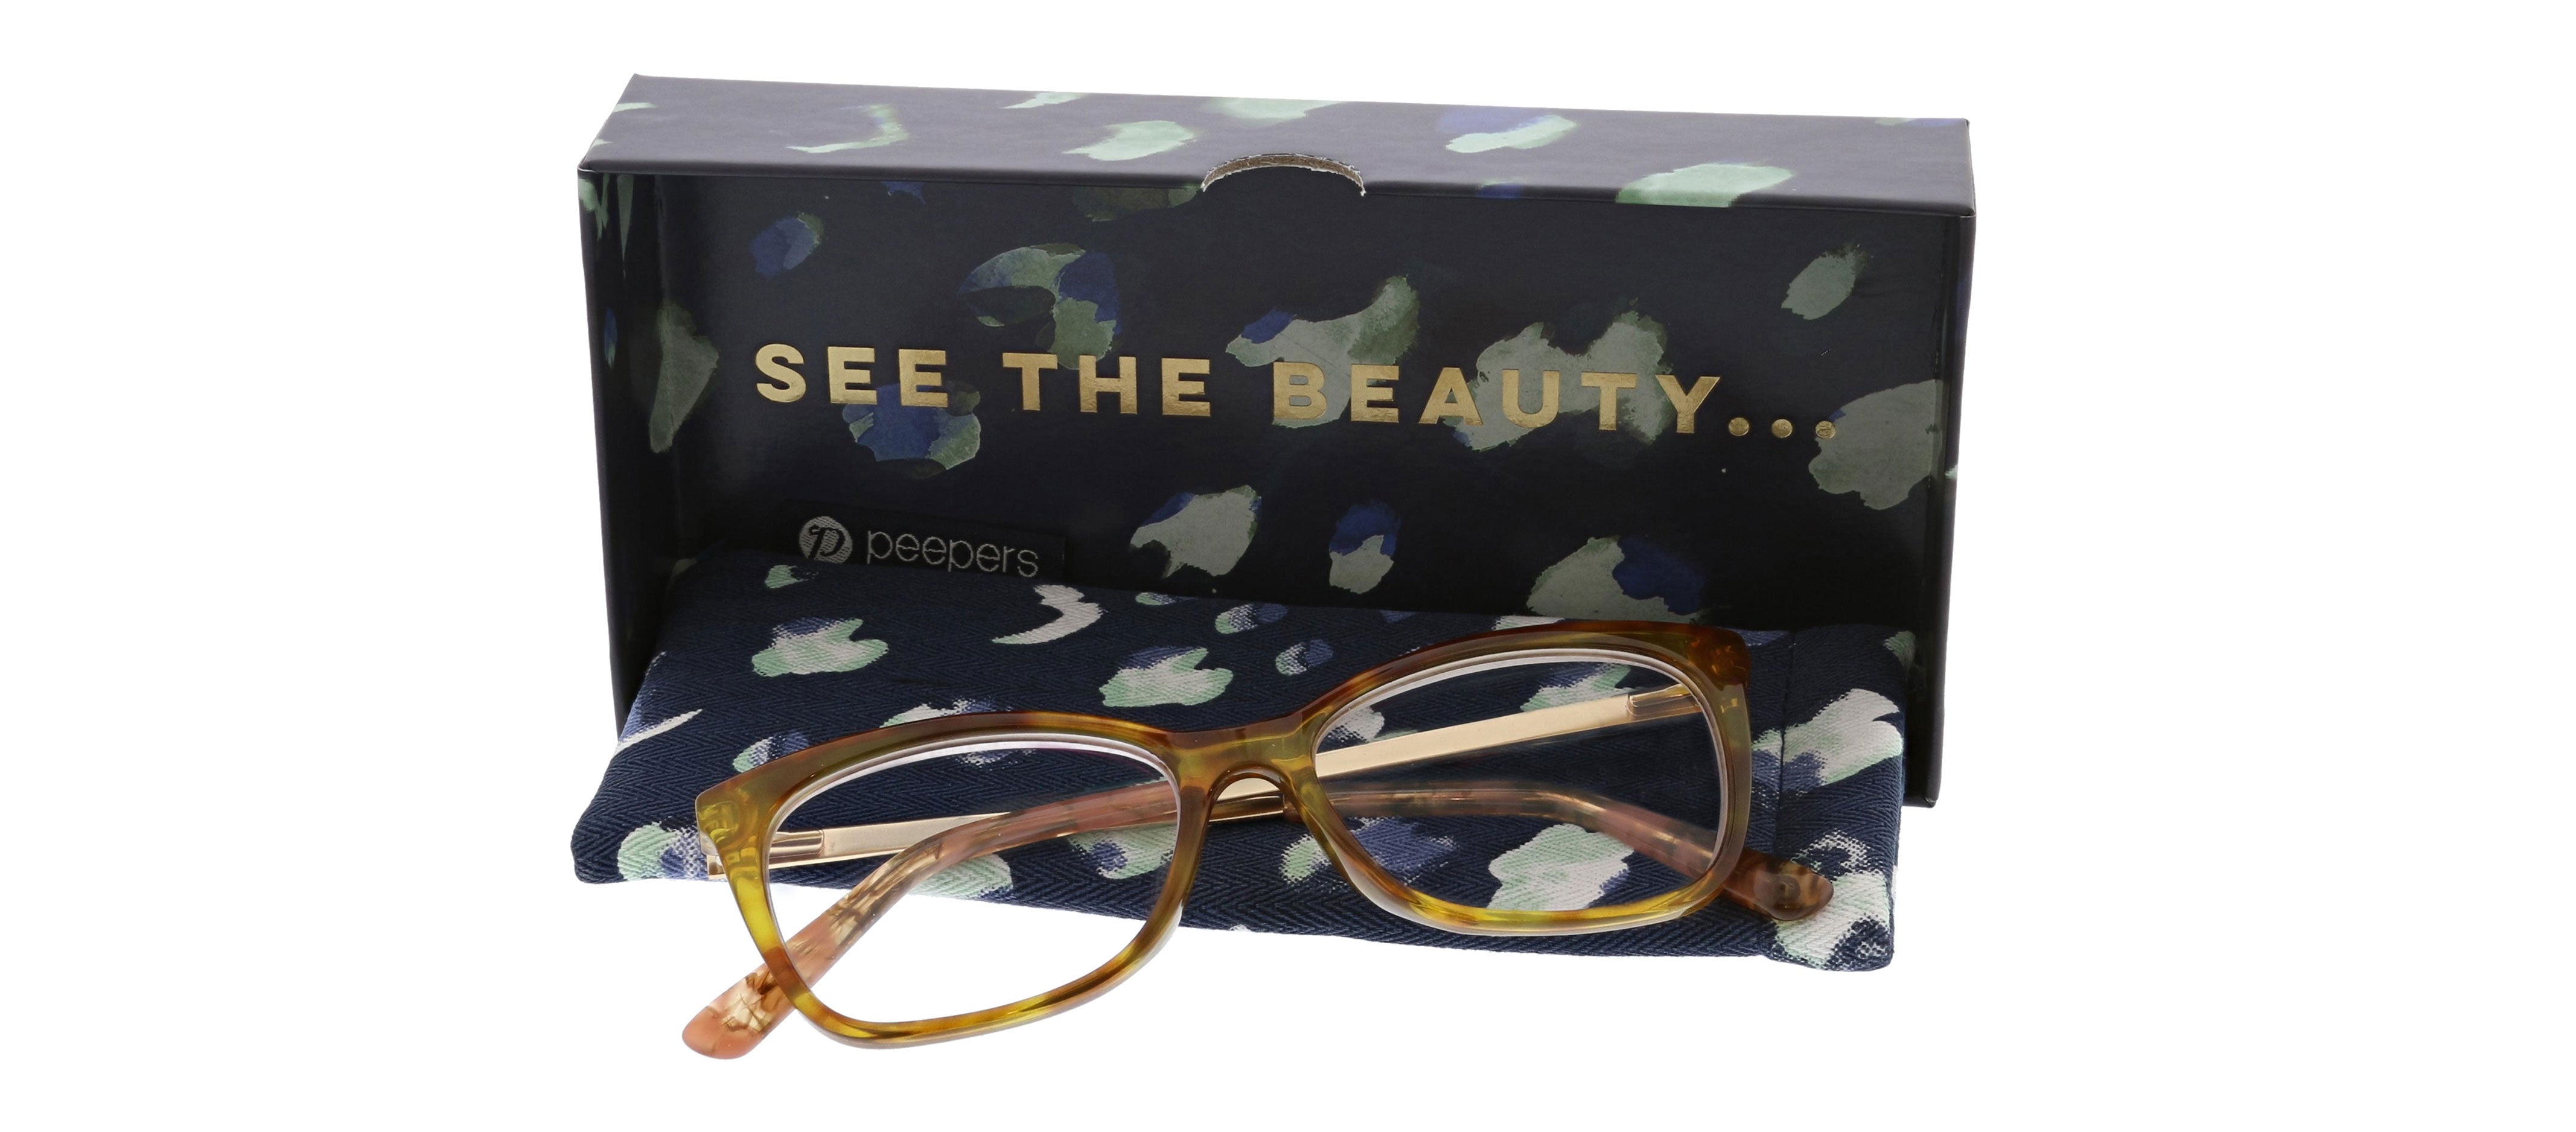 Peepers See The Beauty blue light glasses packaged in box